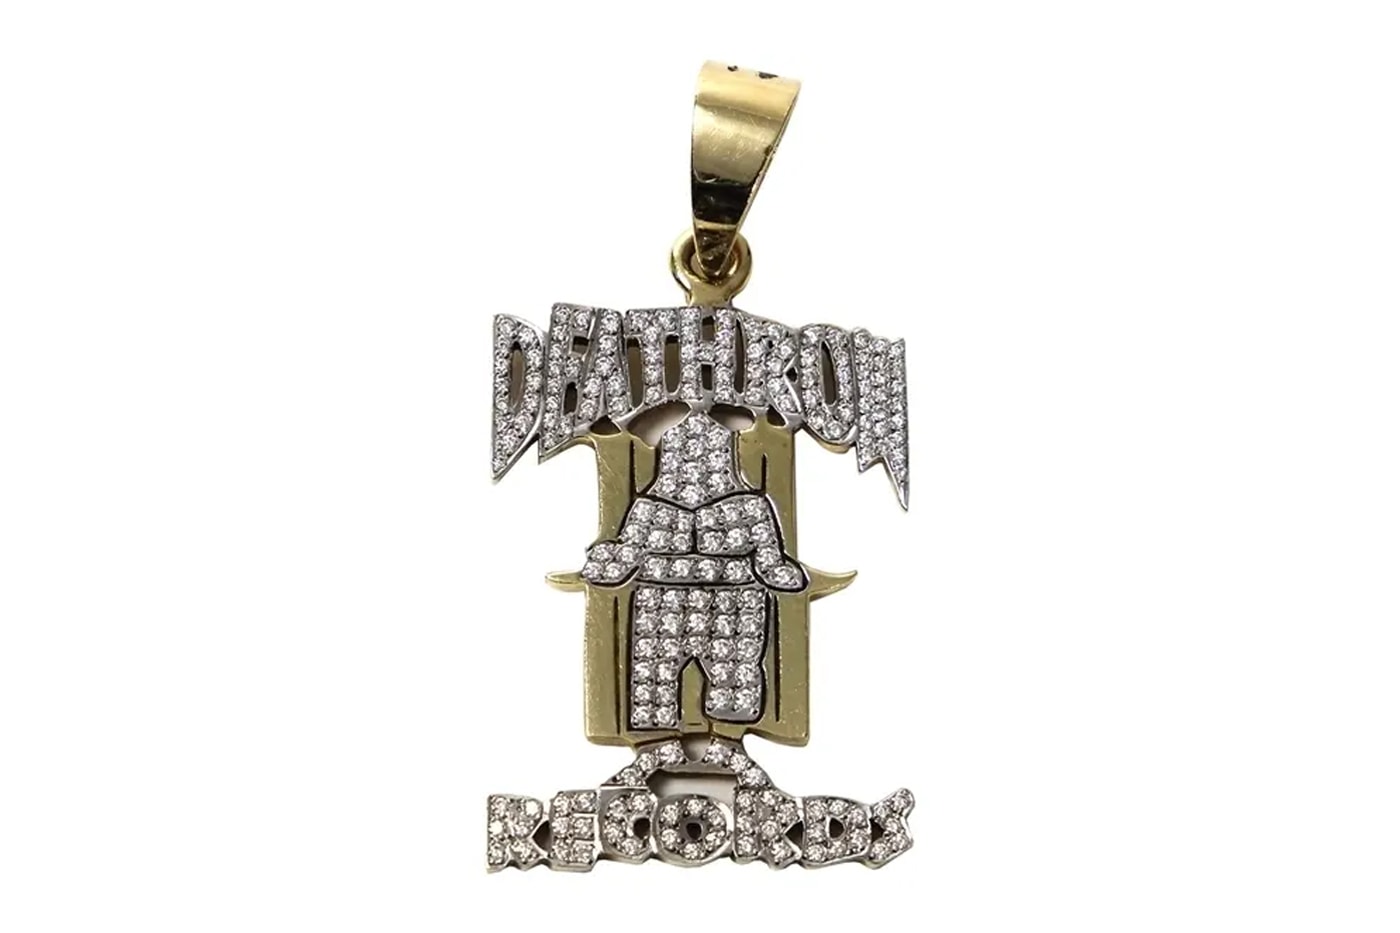 Death Row Records Pendant gold diamond Could Sell 1 million USD auction